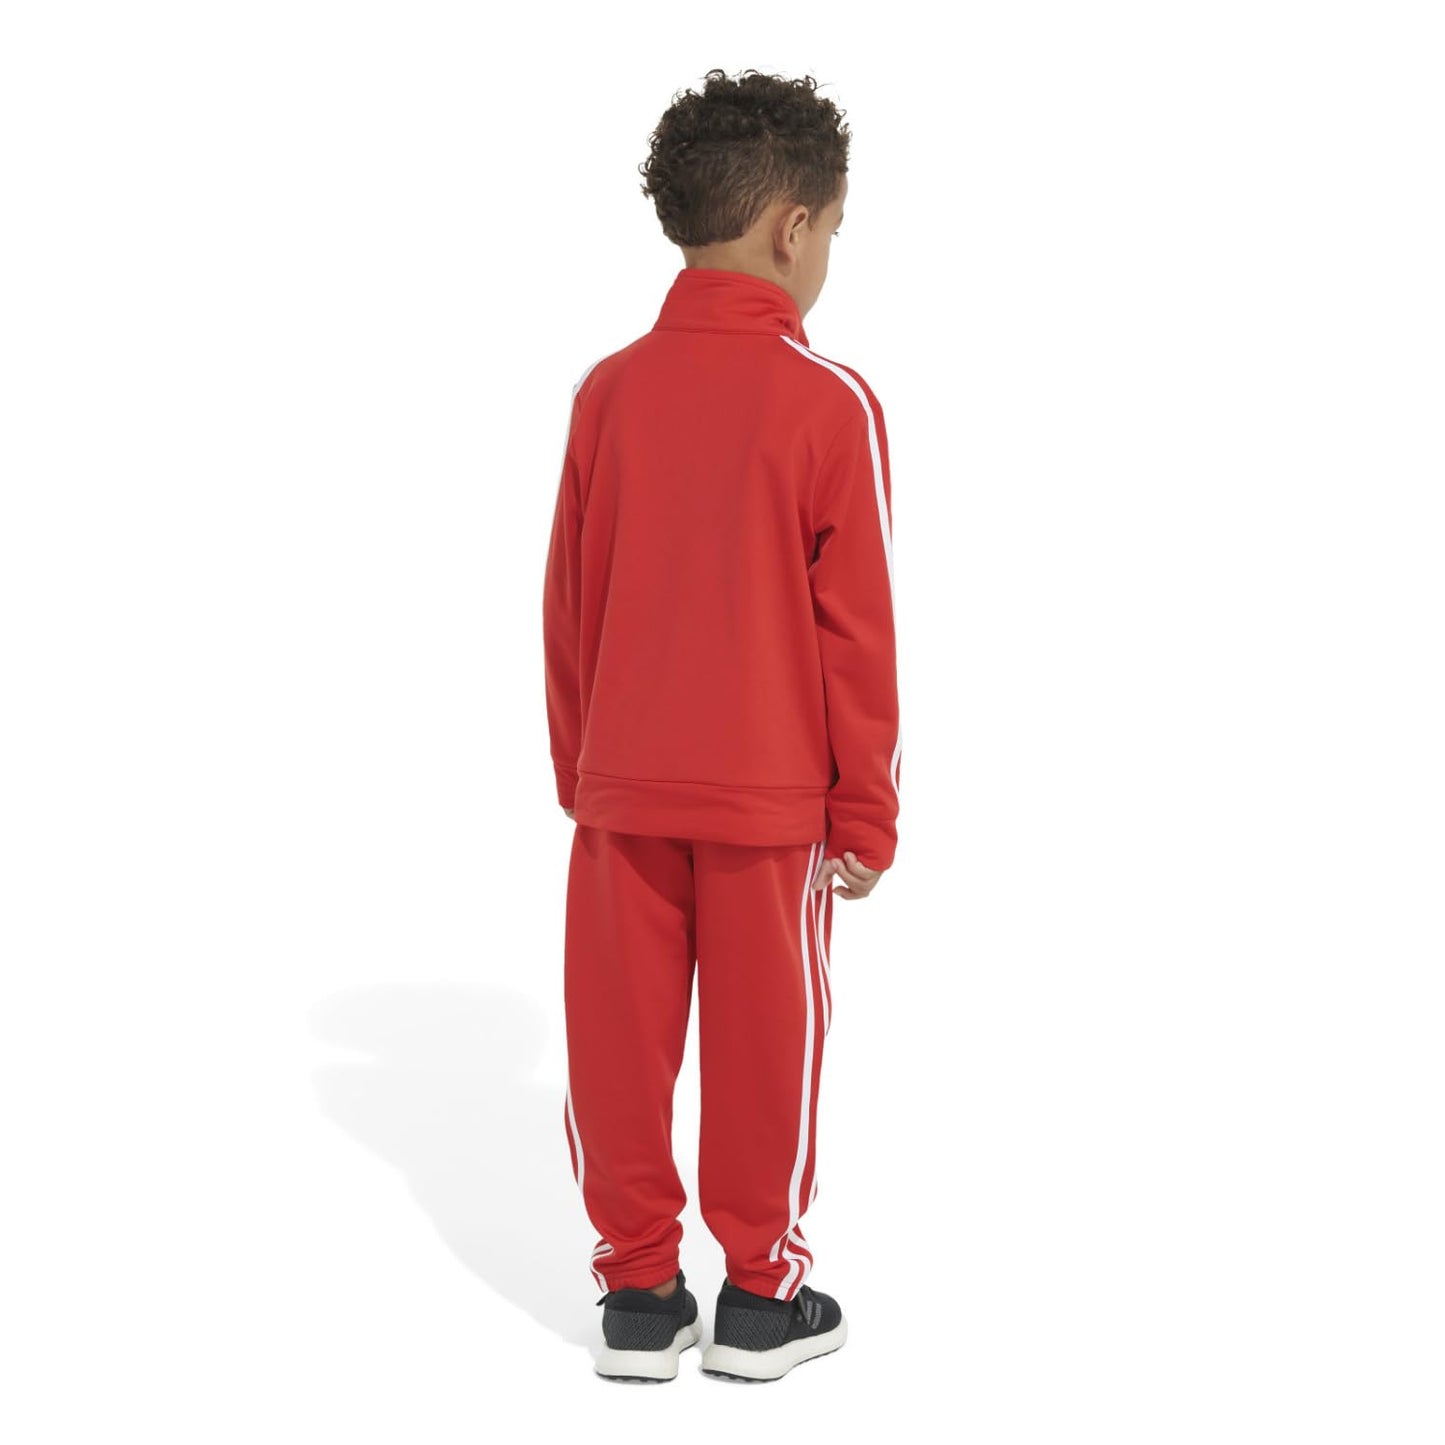 adidas Boys' Little Tricot Jacket & Pant Clothing Set, Essential Tricot Vivid Red, 12 Months (AG6443N)